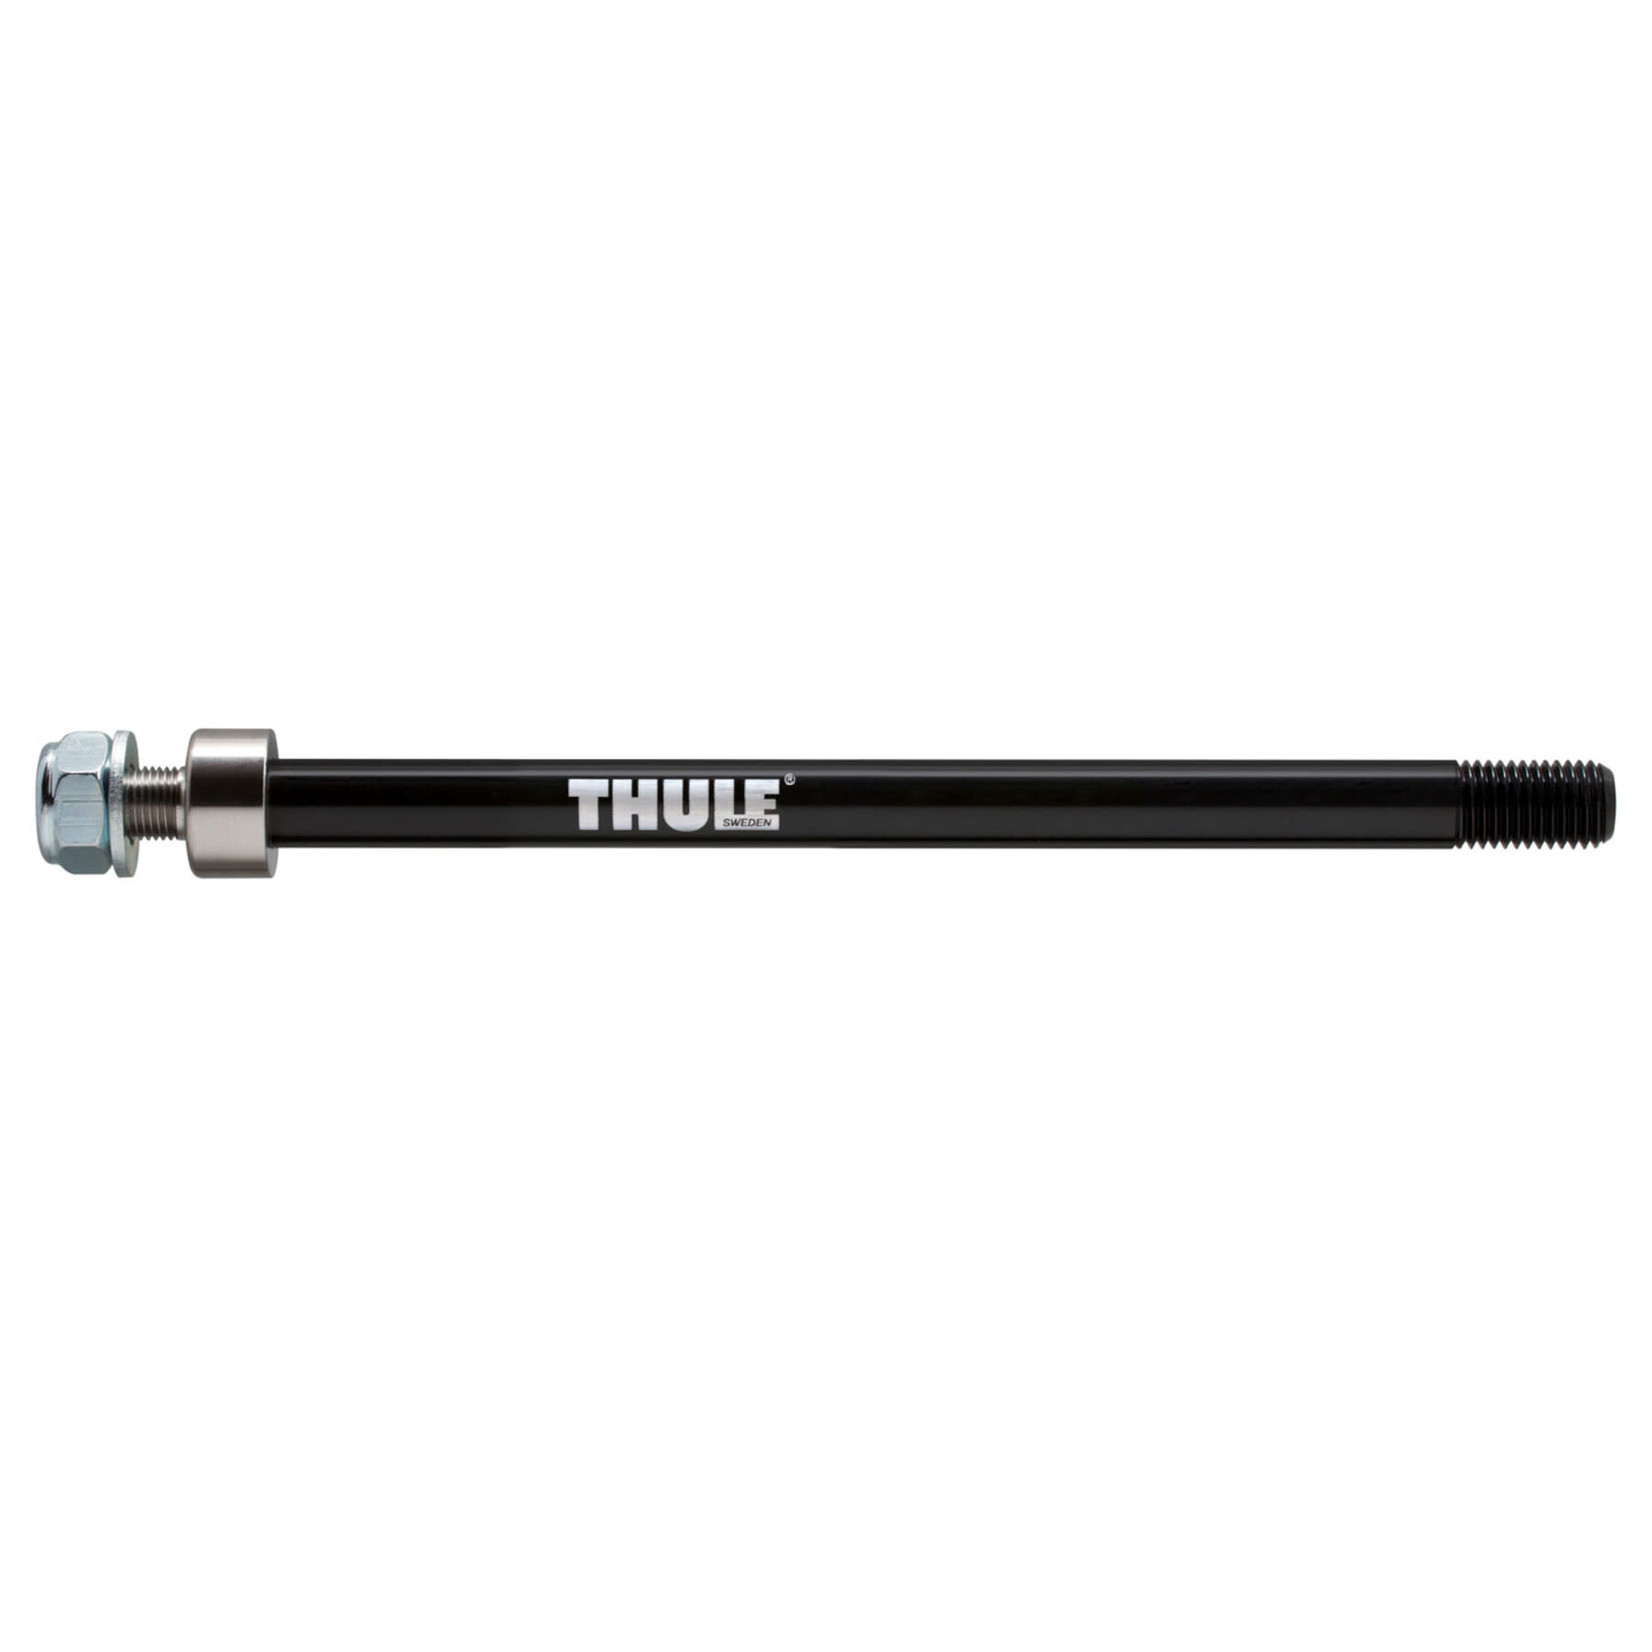 Thule Thule Thru Axle Syntace (M12 x 1.0) Adapter 160-172mm 20110733 - Black